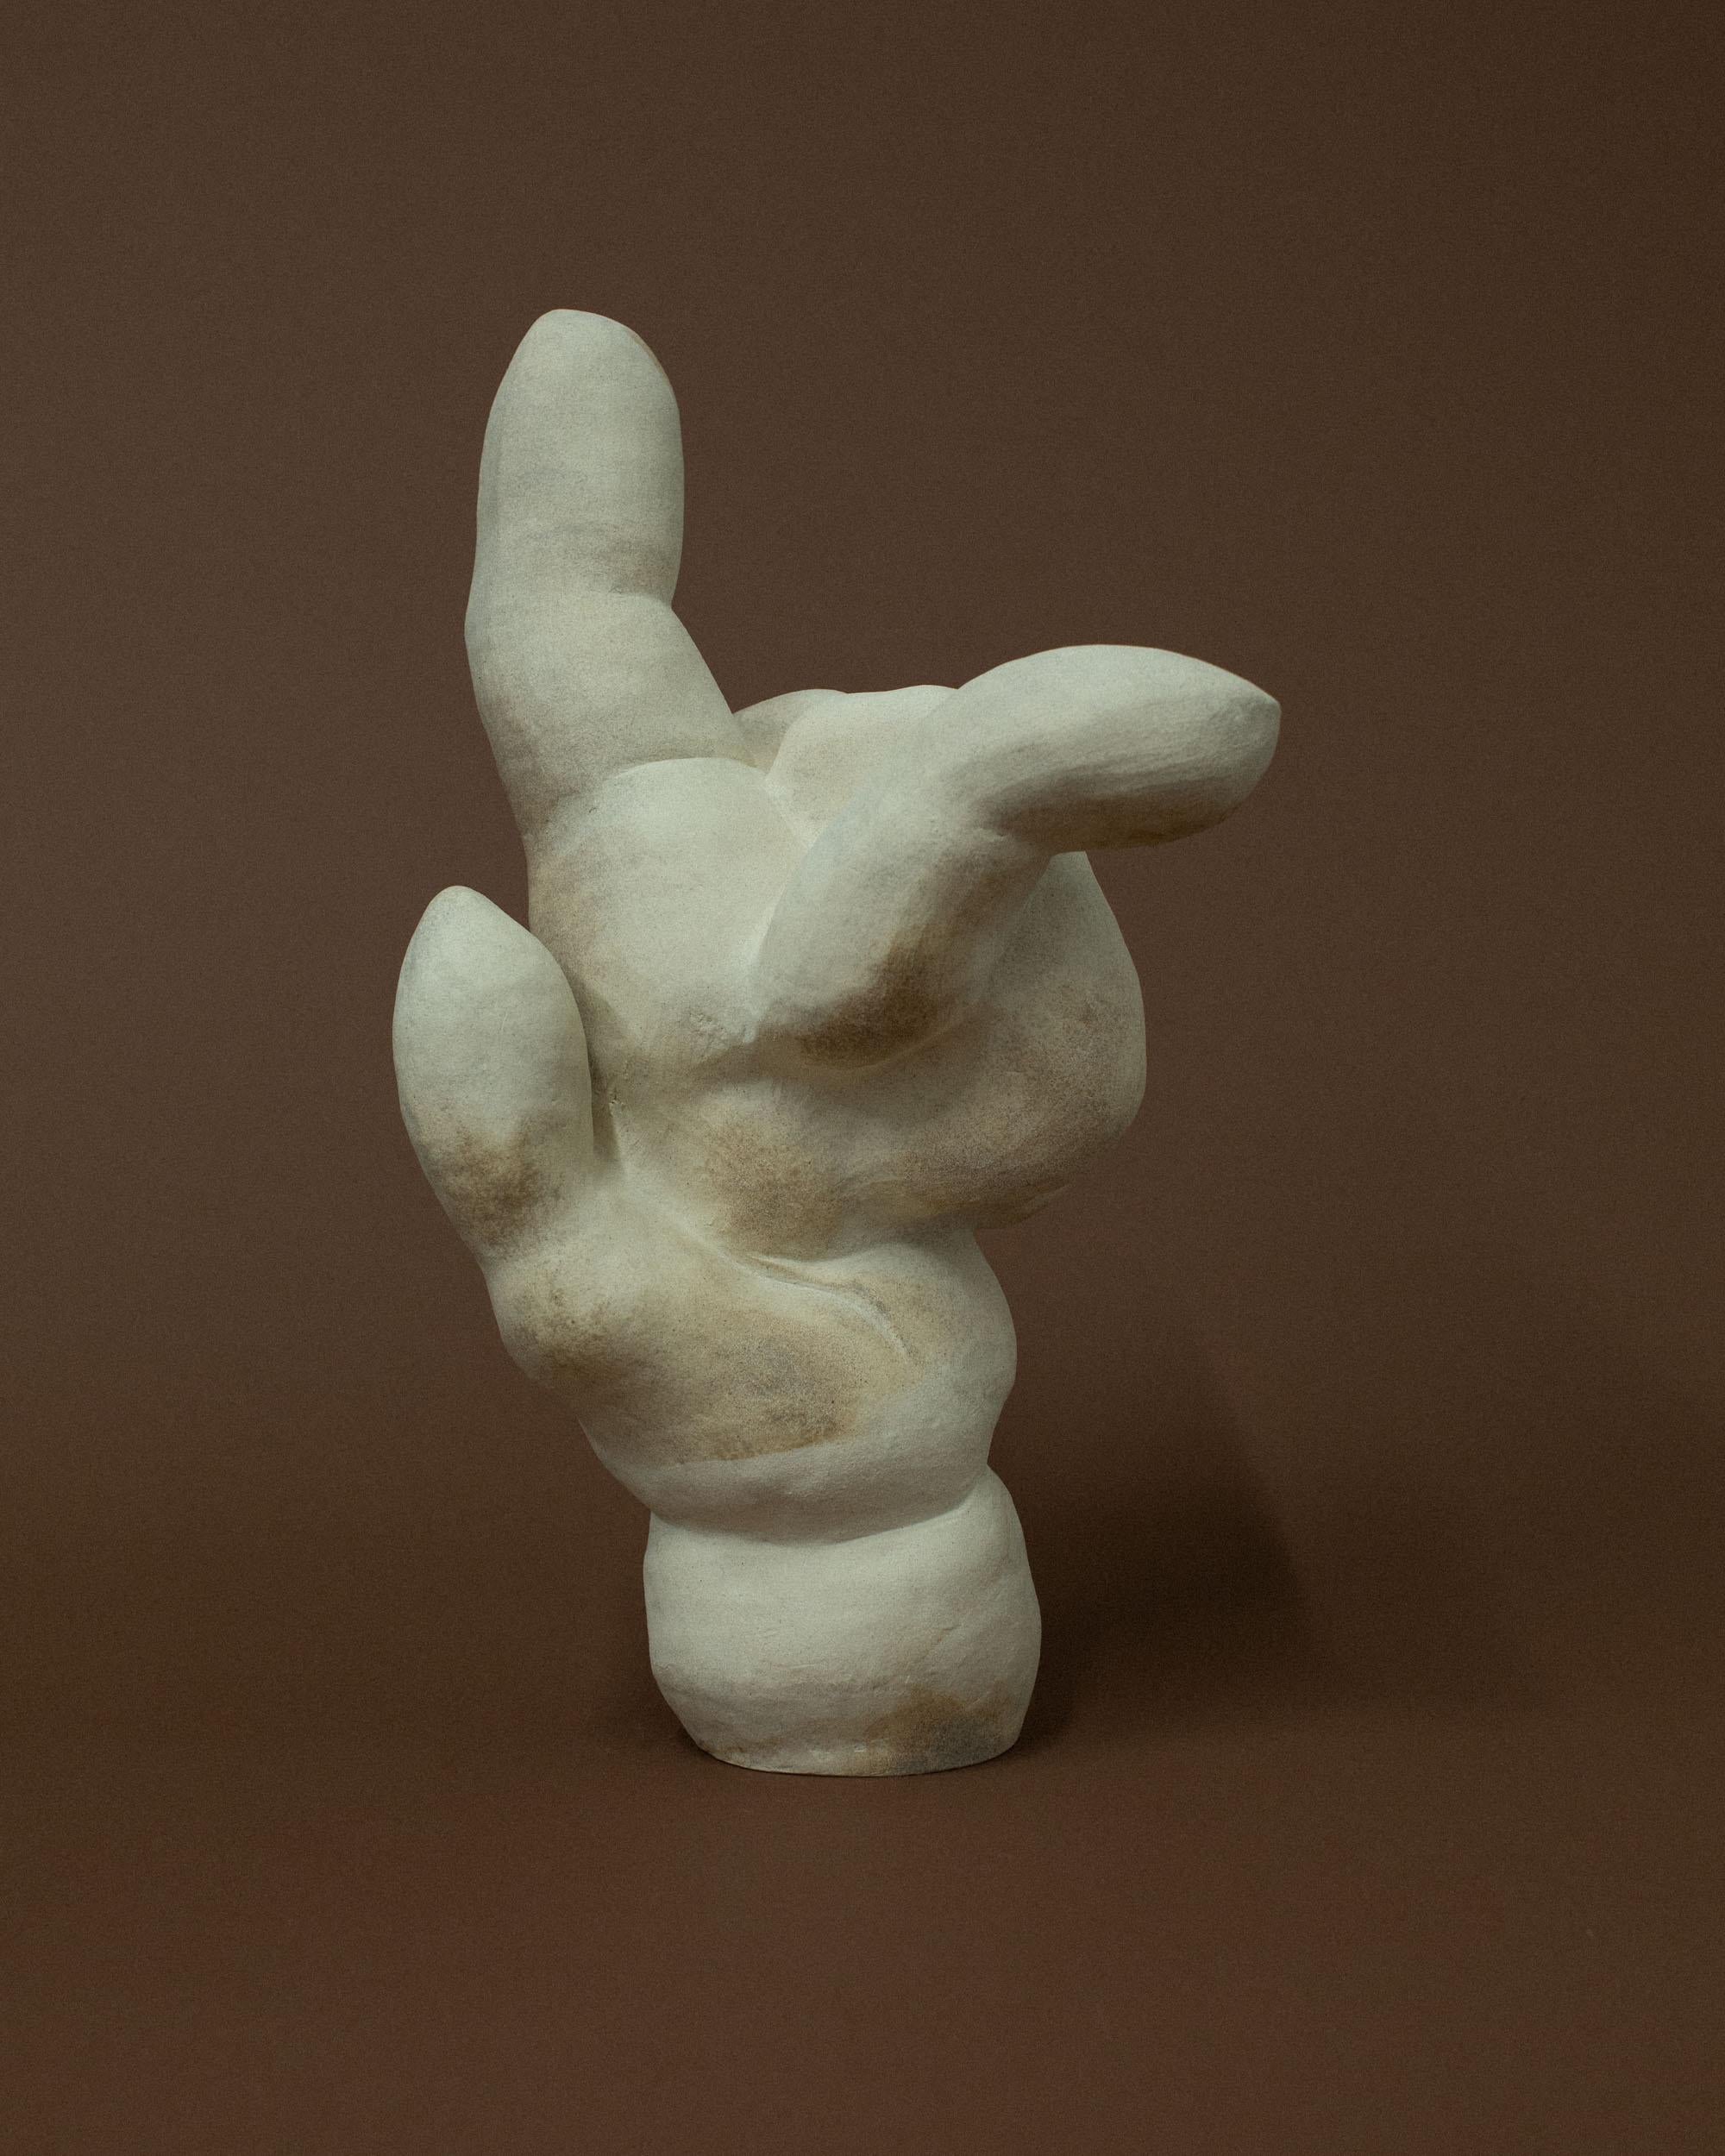 Natural Folding Hand Sculpture by Common Body
Dimensions: W 31 x D 26 x H 49 cm
Materials: Natural Stoneware

Common body is a sculpture and interior object studio founded by nathaniel kyung smith, an artist whose passion lies in the intersection of